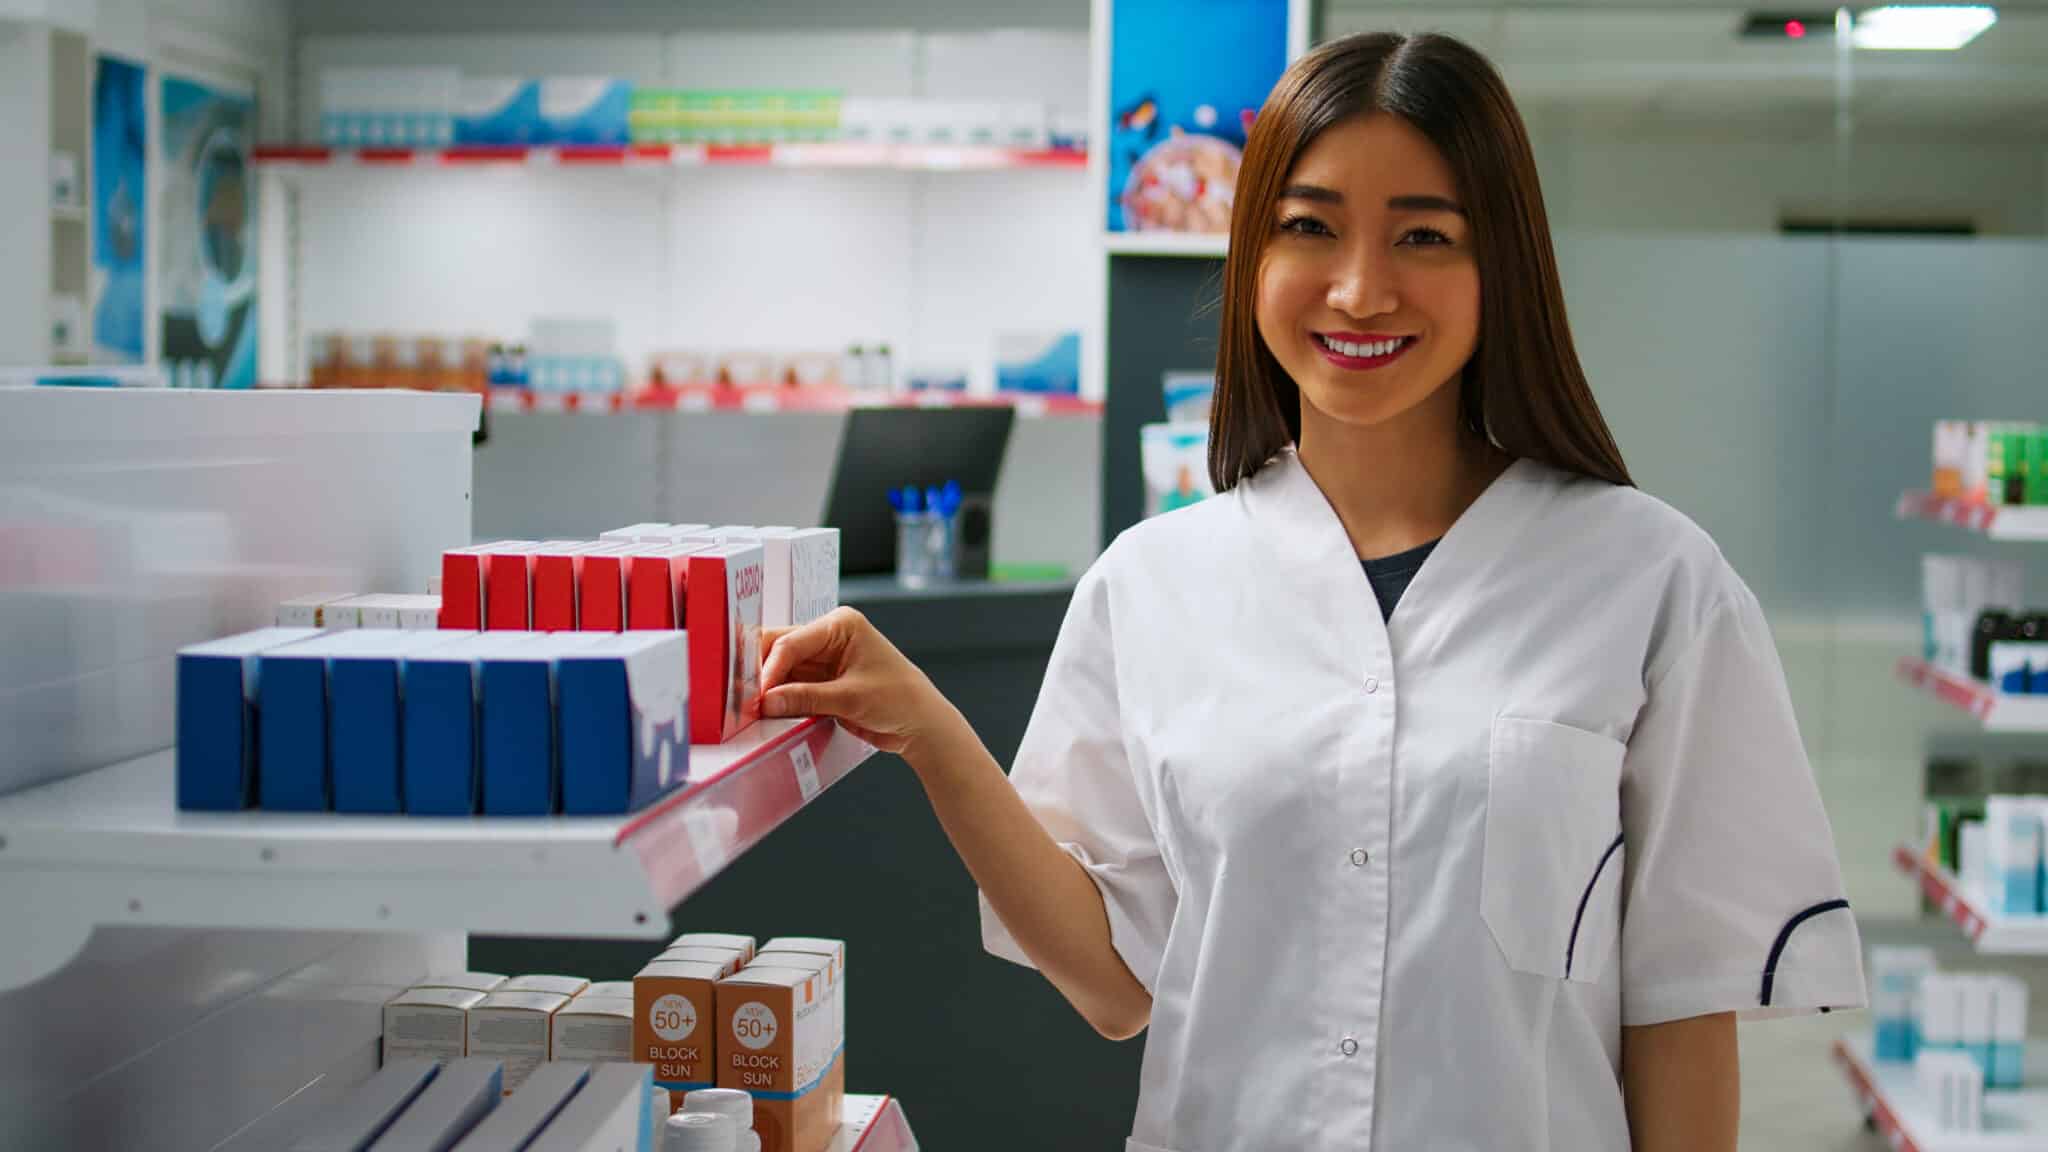 Pharmacy professional smiling while organizing medicine boxes on shelves, exemplifying mental well-being in the workplace.